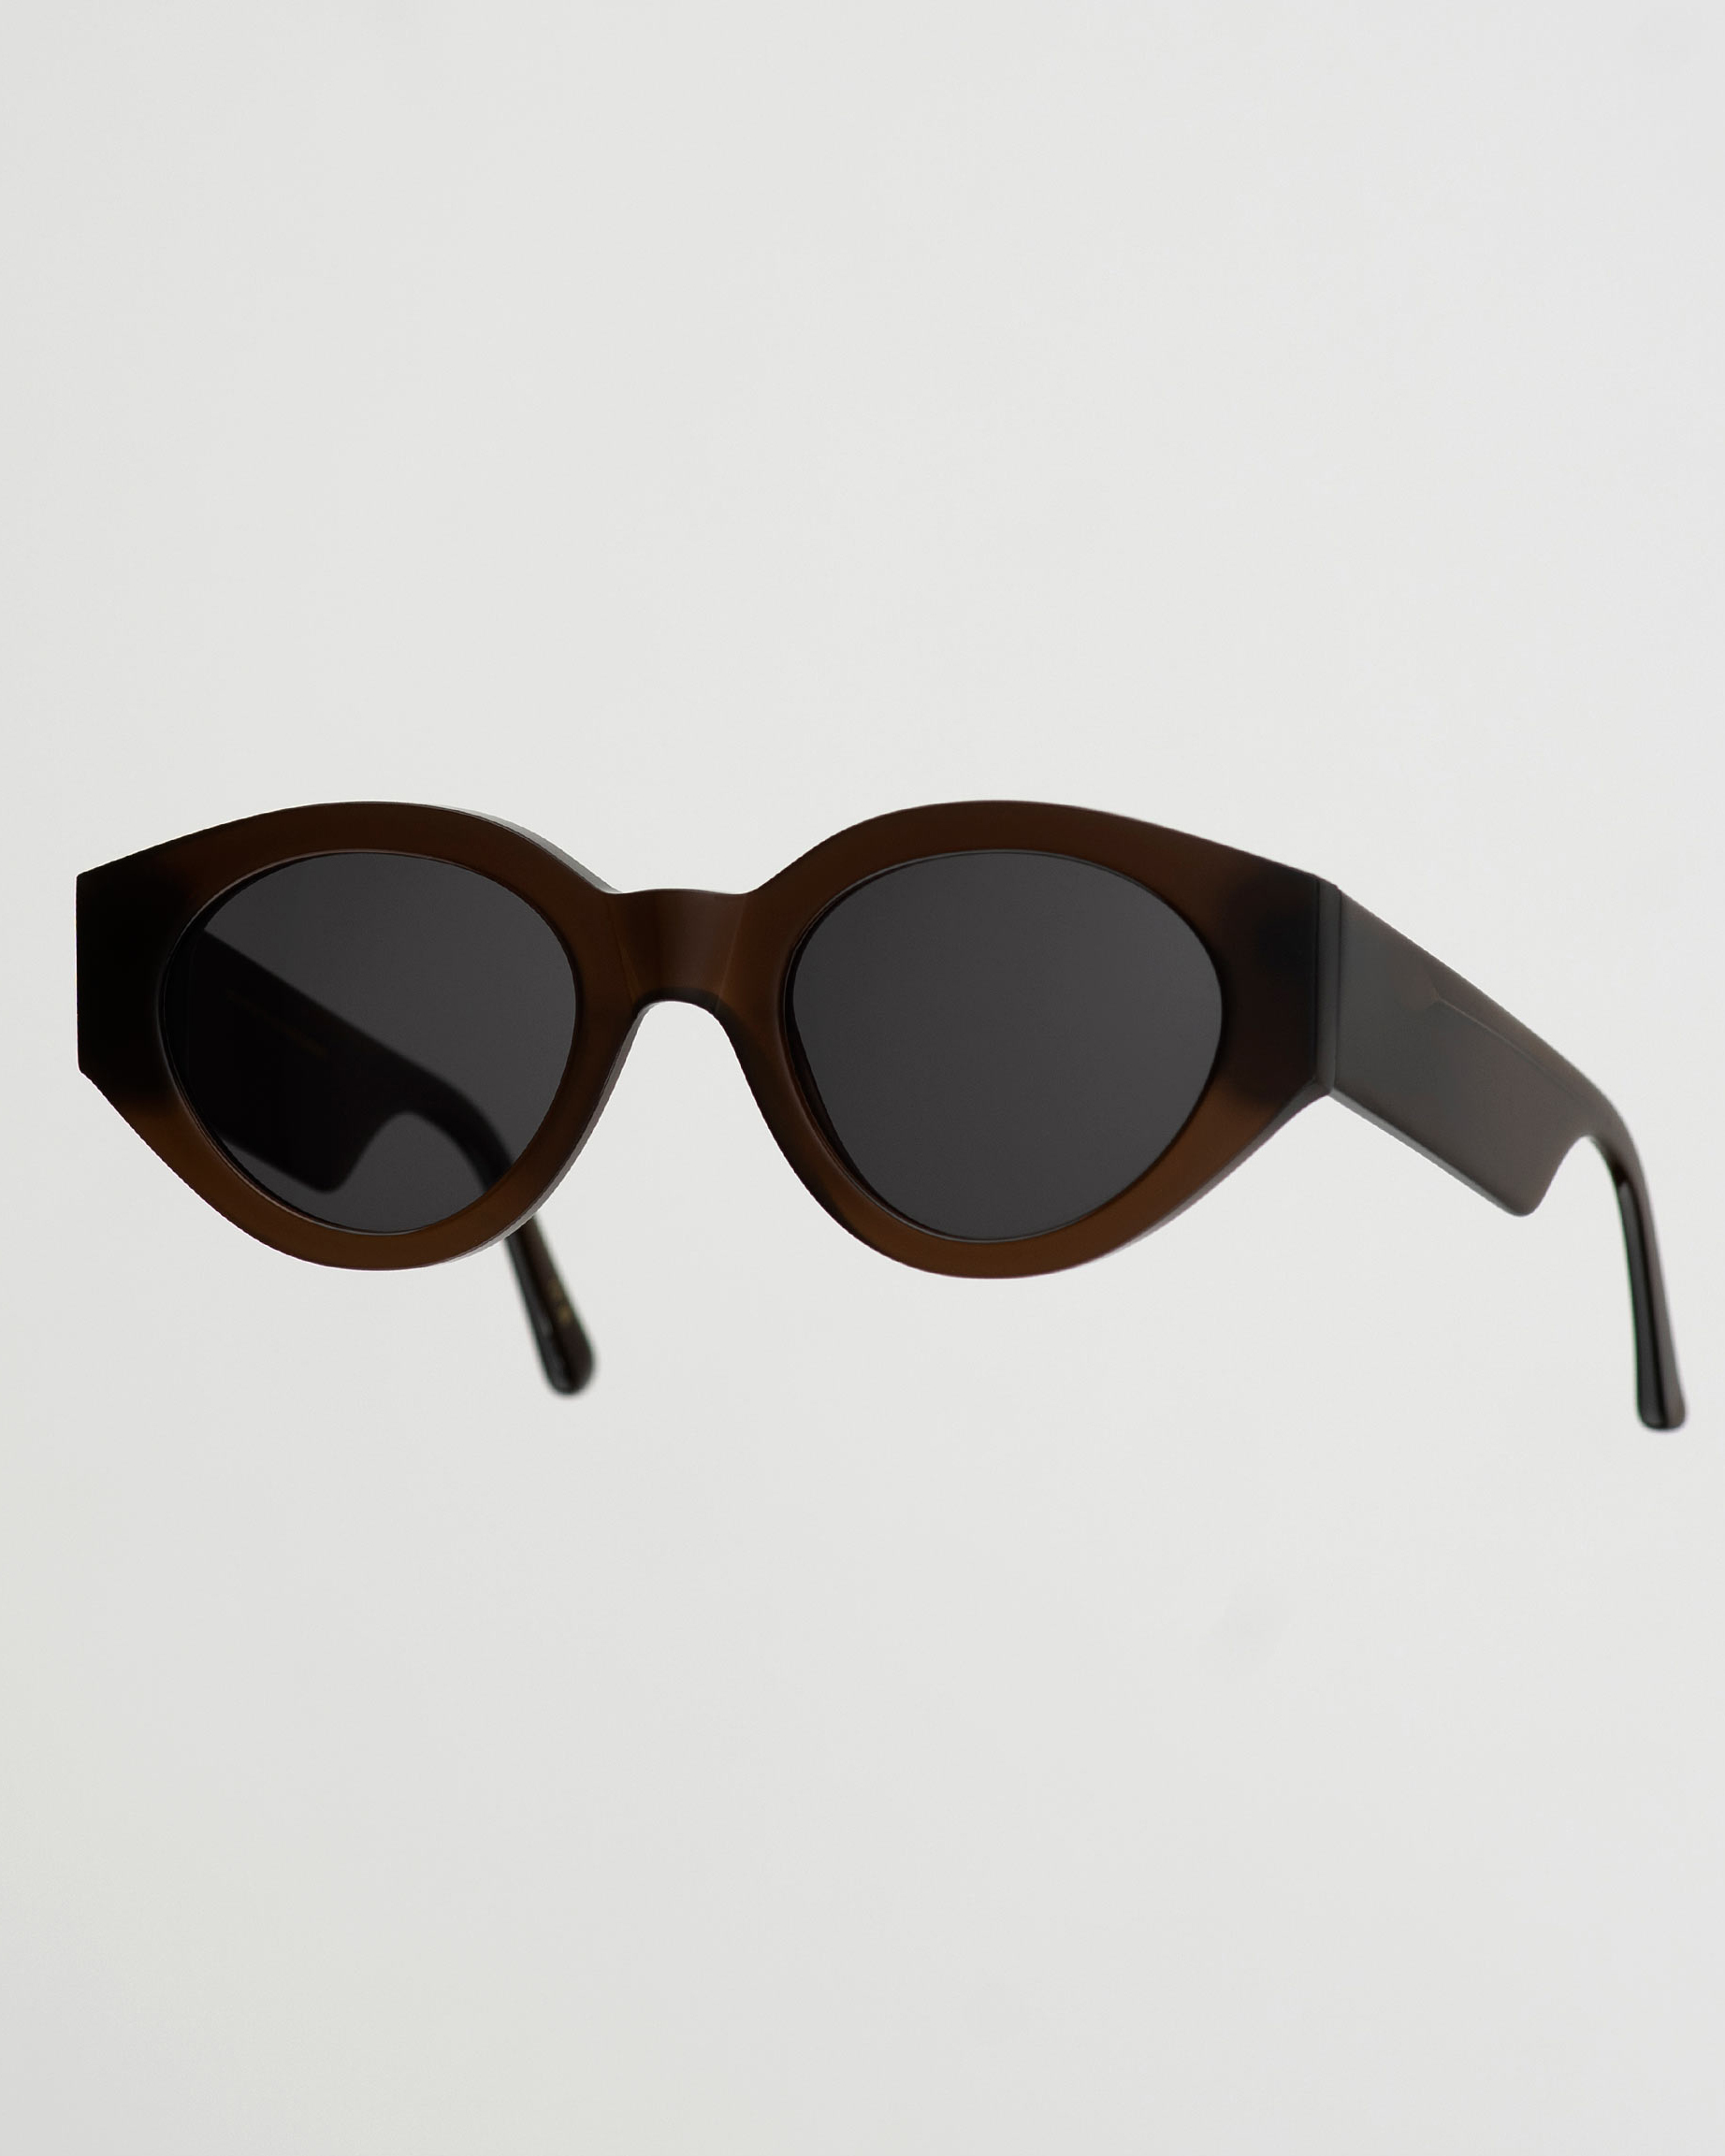 Polly Chocolate - Grey Solid Lens